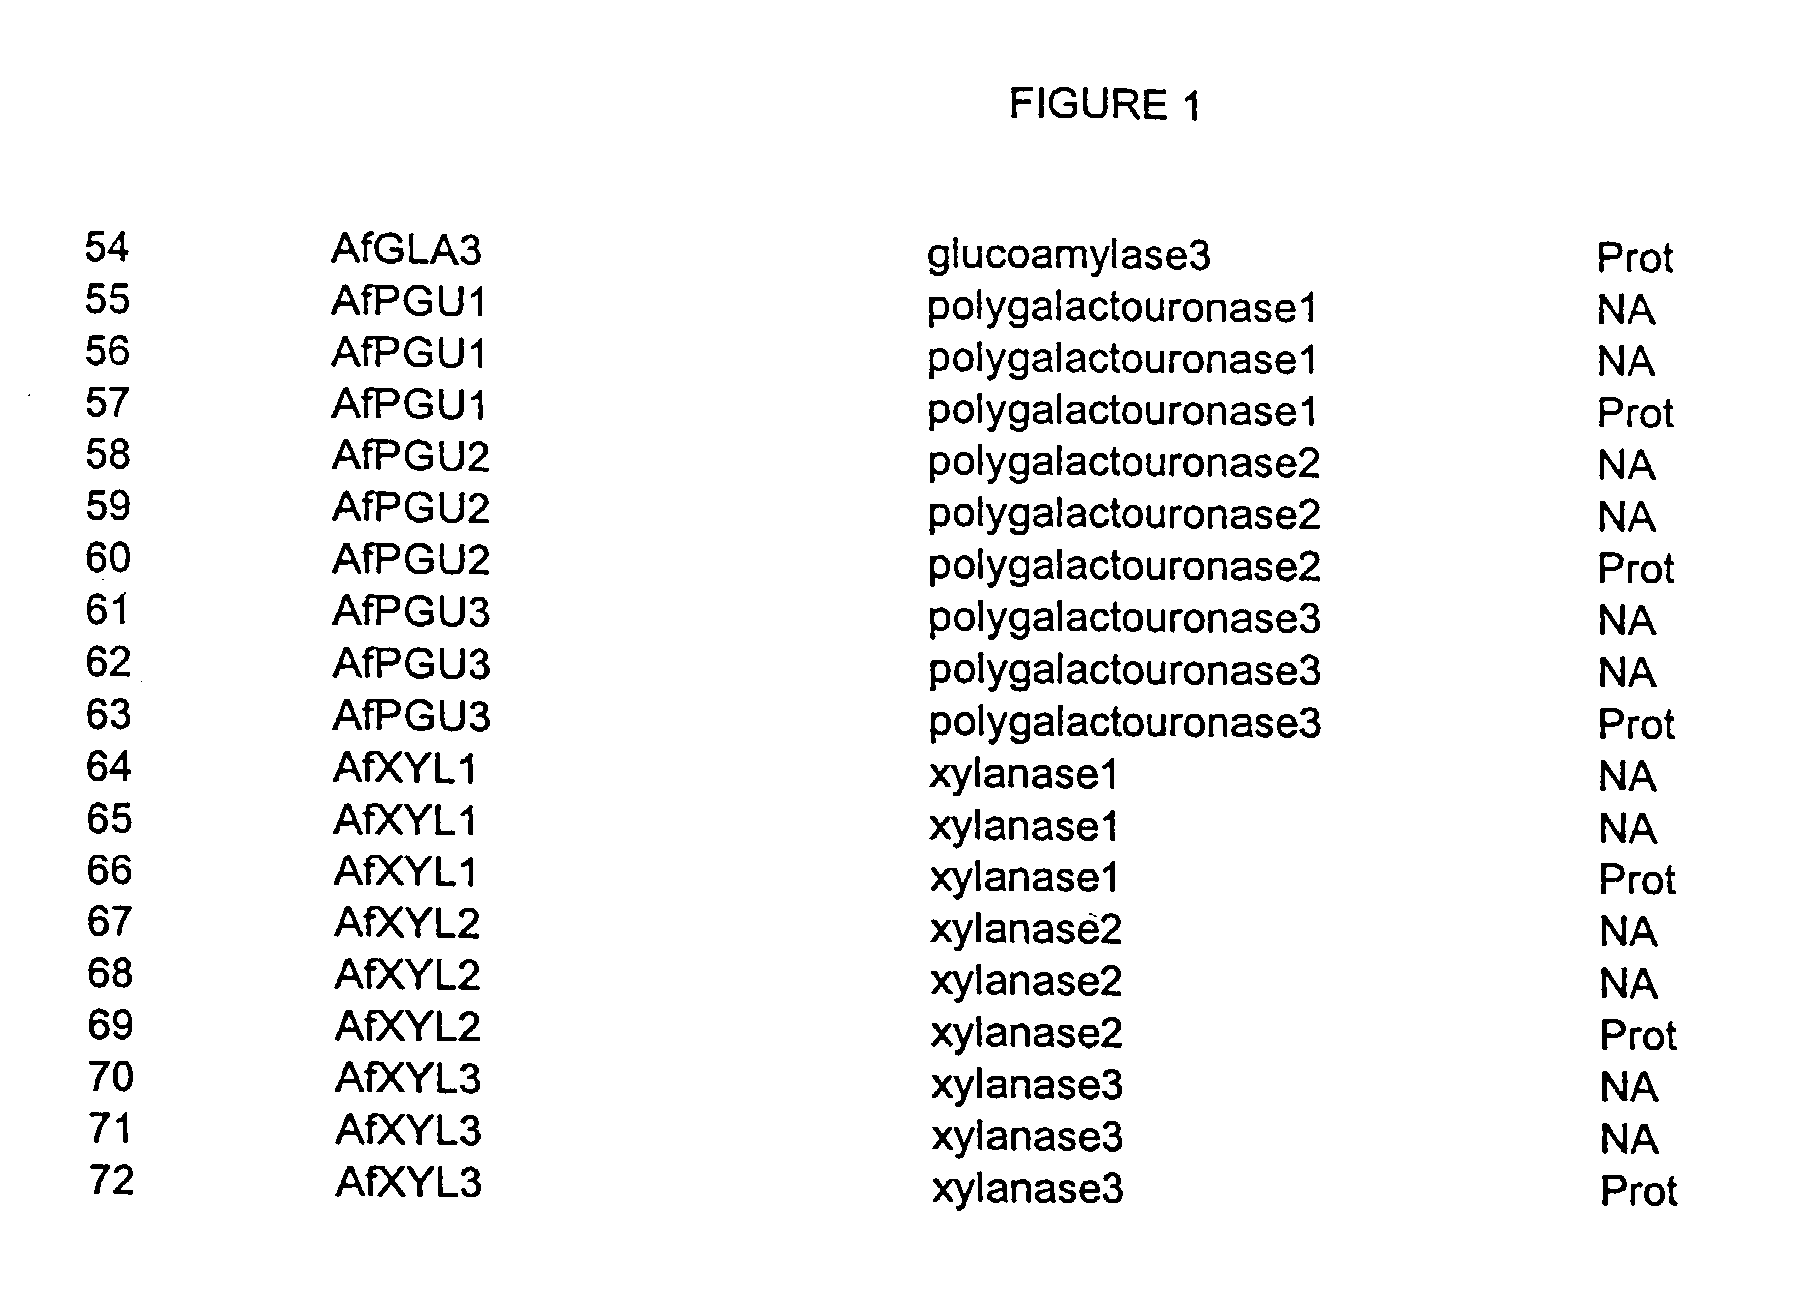 Nucleic acids of aspergillus fumigatus encoding industrial enzymes and methods of use